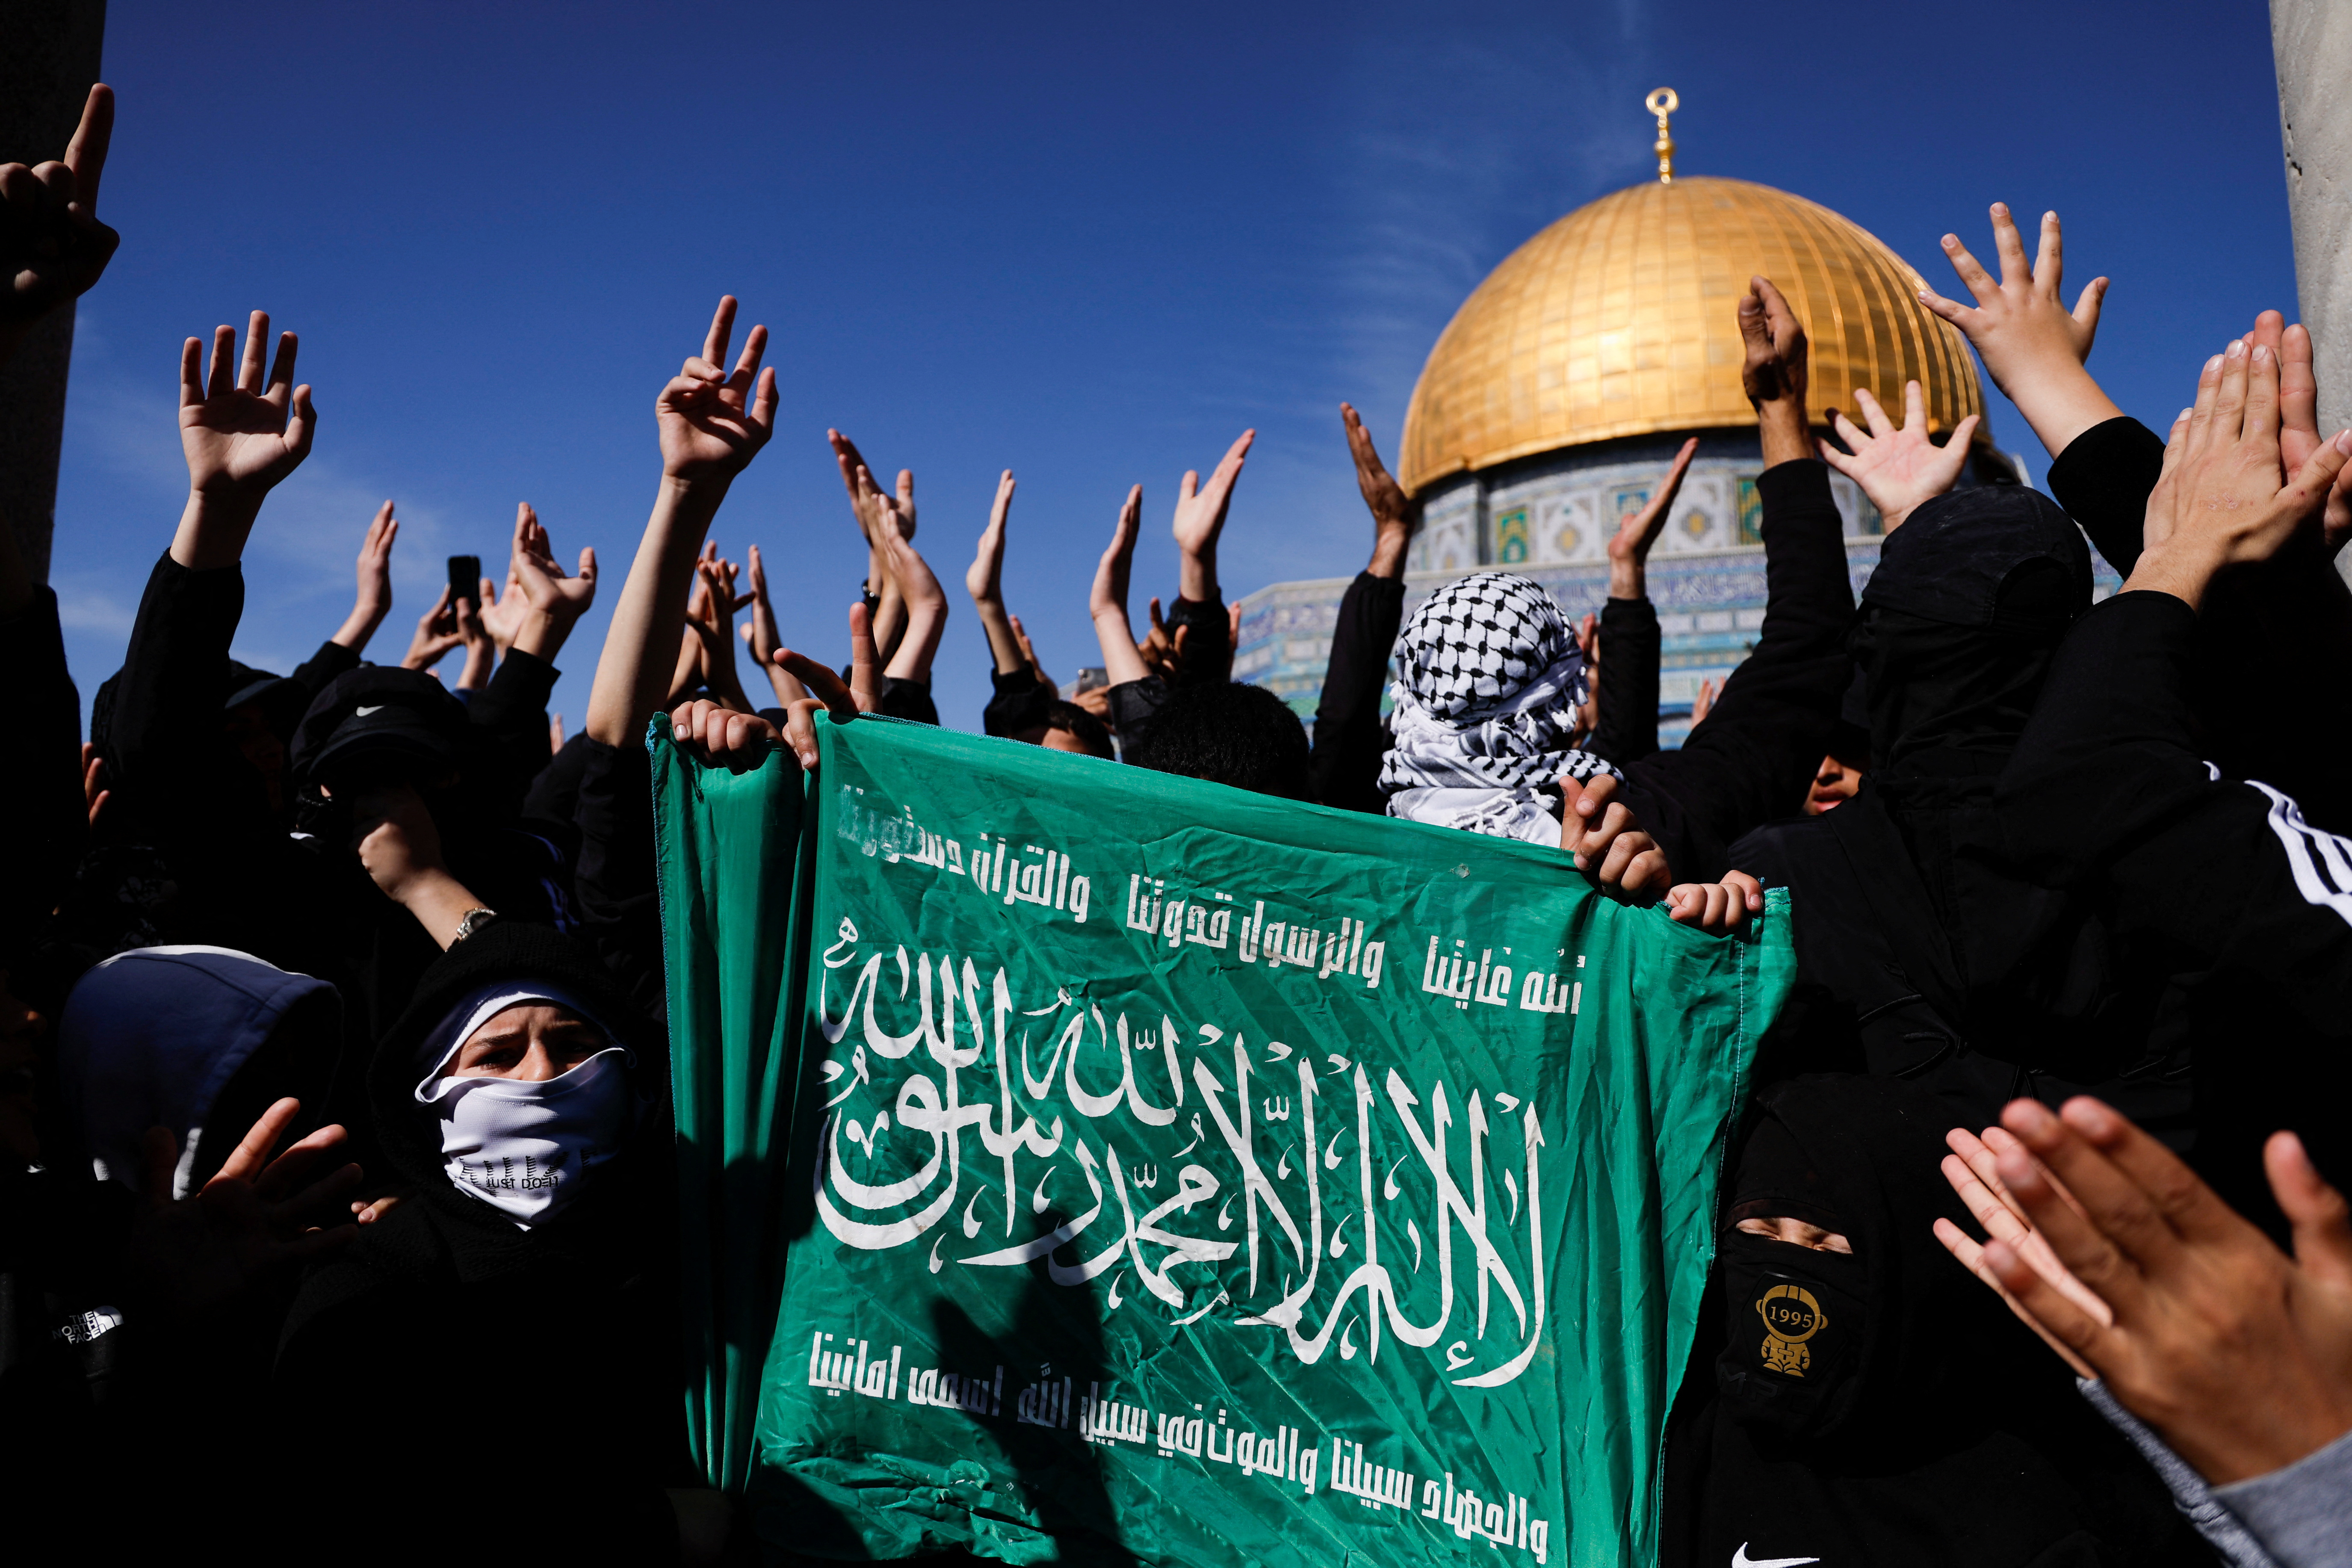 Palestinians protest recent activity in Gaza in front of the Dome of the Rock, in Jerusalem's Old City